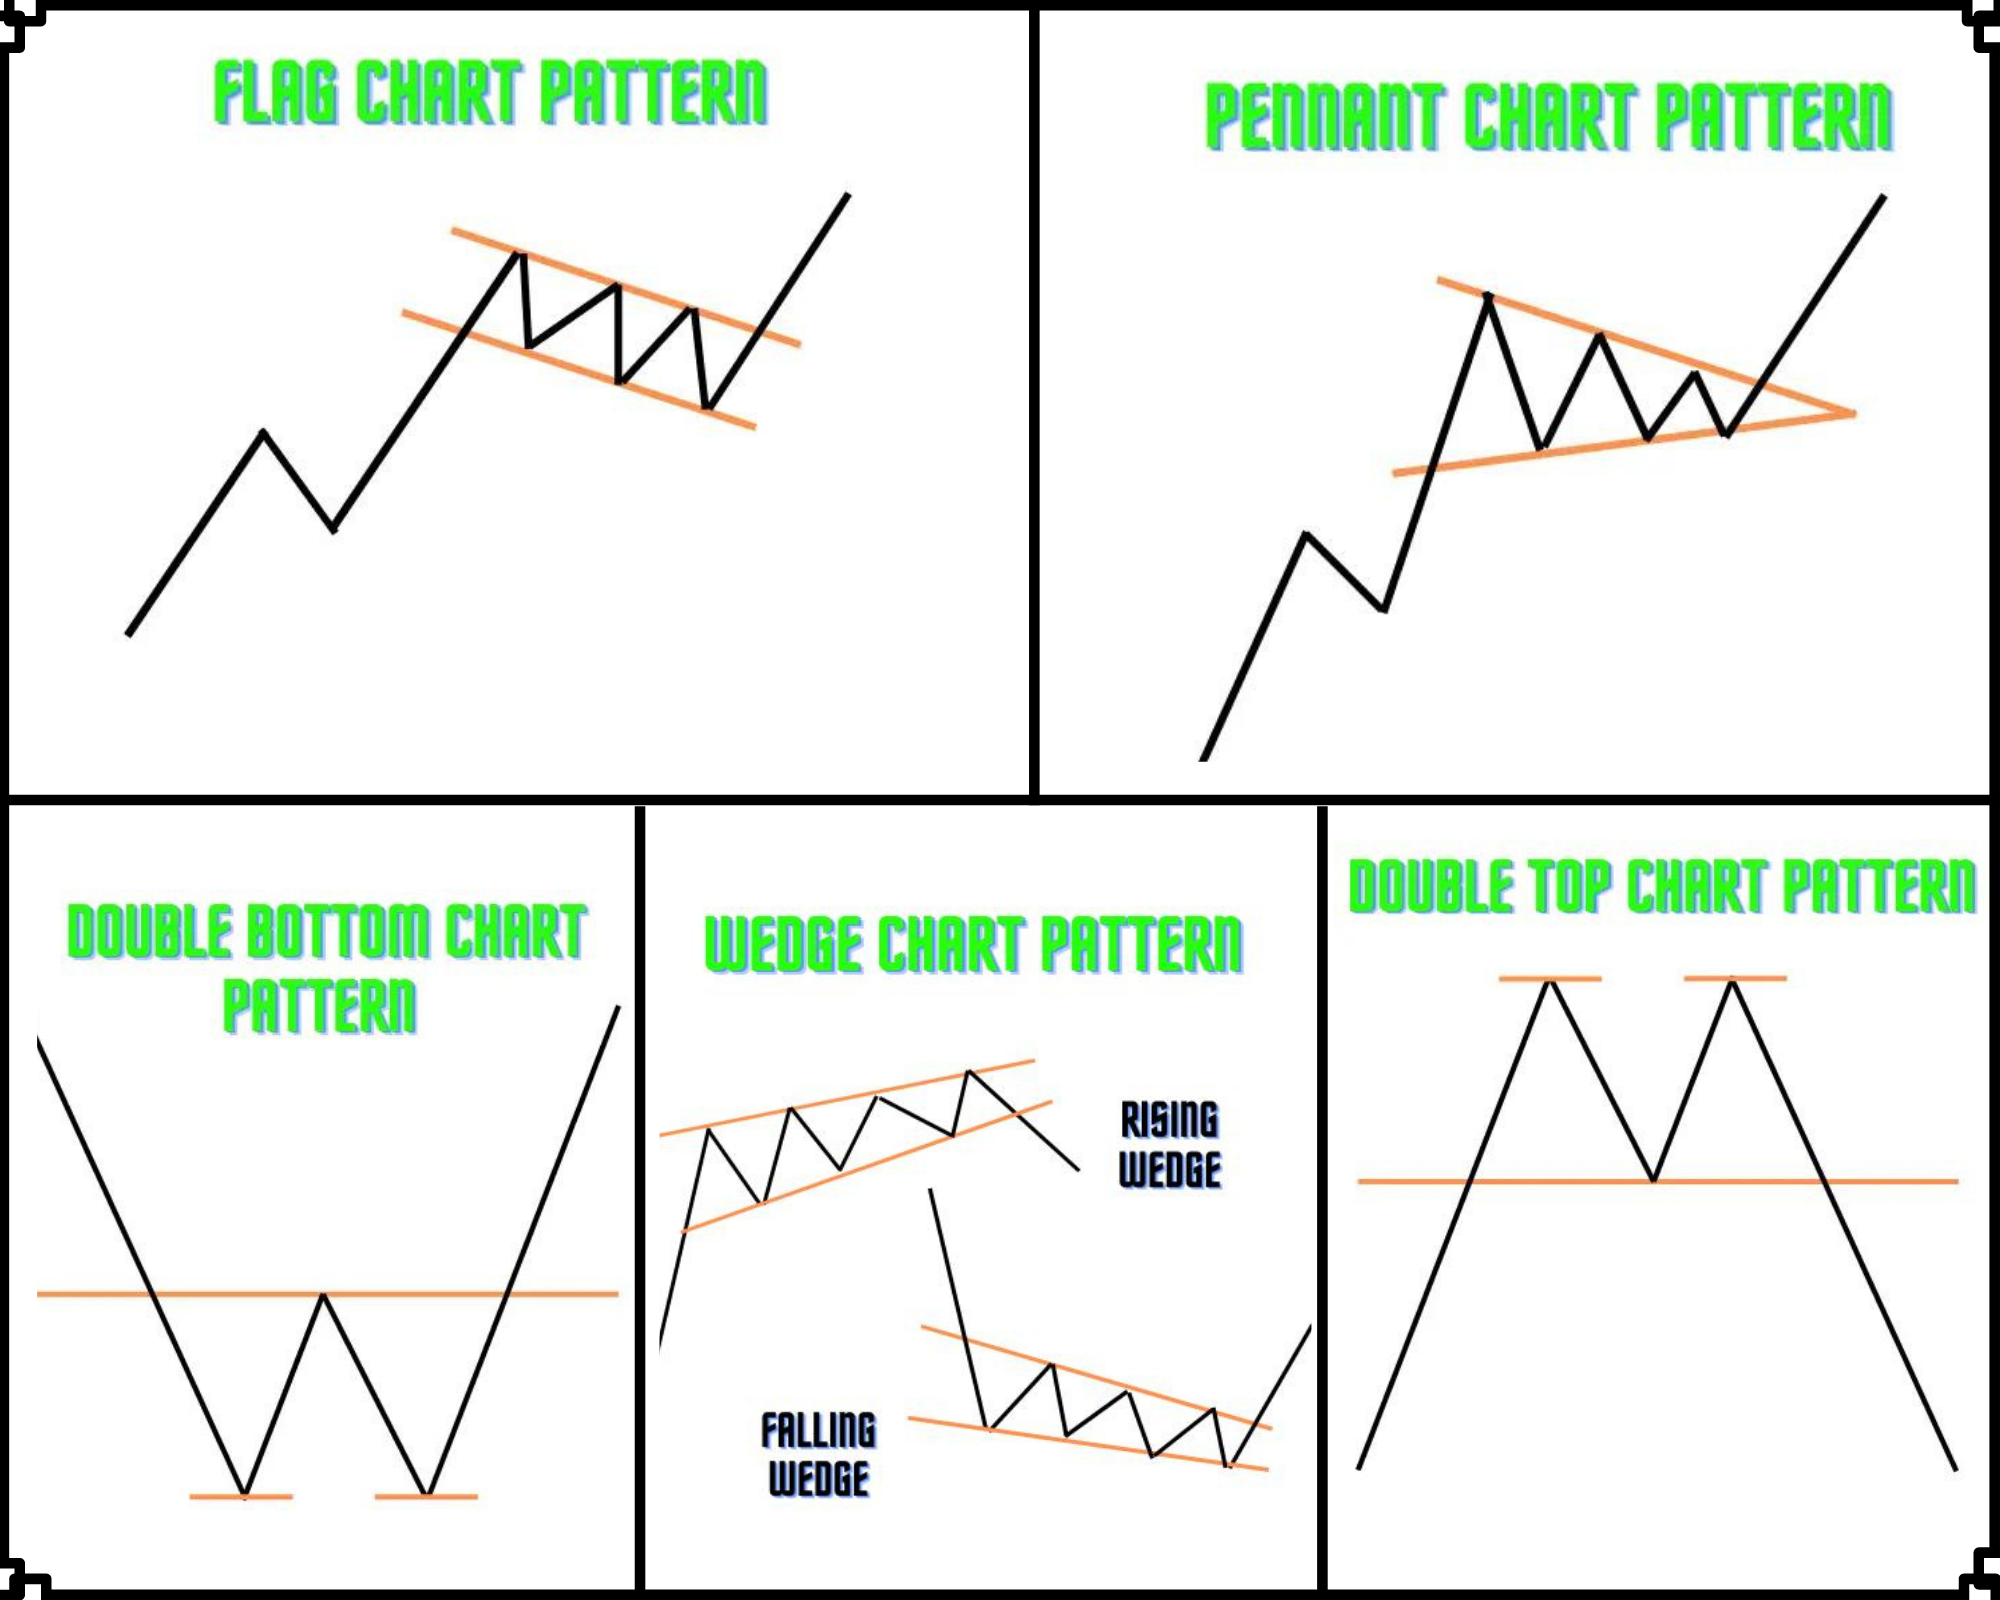 Option Trading Chart Patterns – 5 Best Chart Patterns For Option Trading